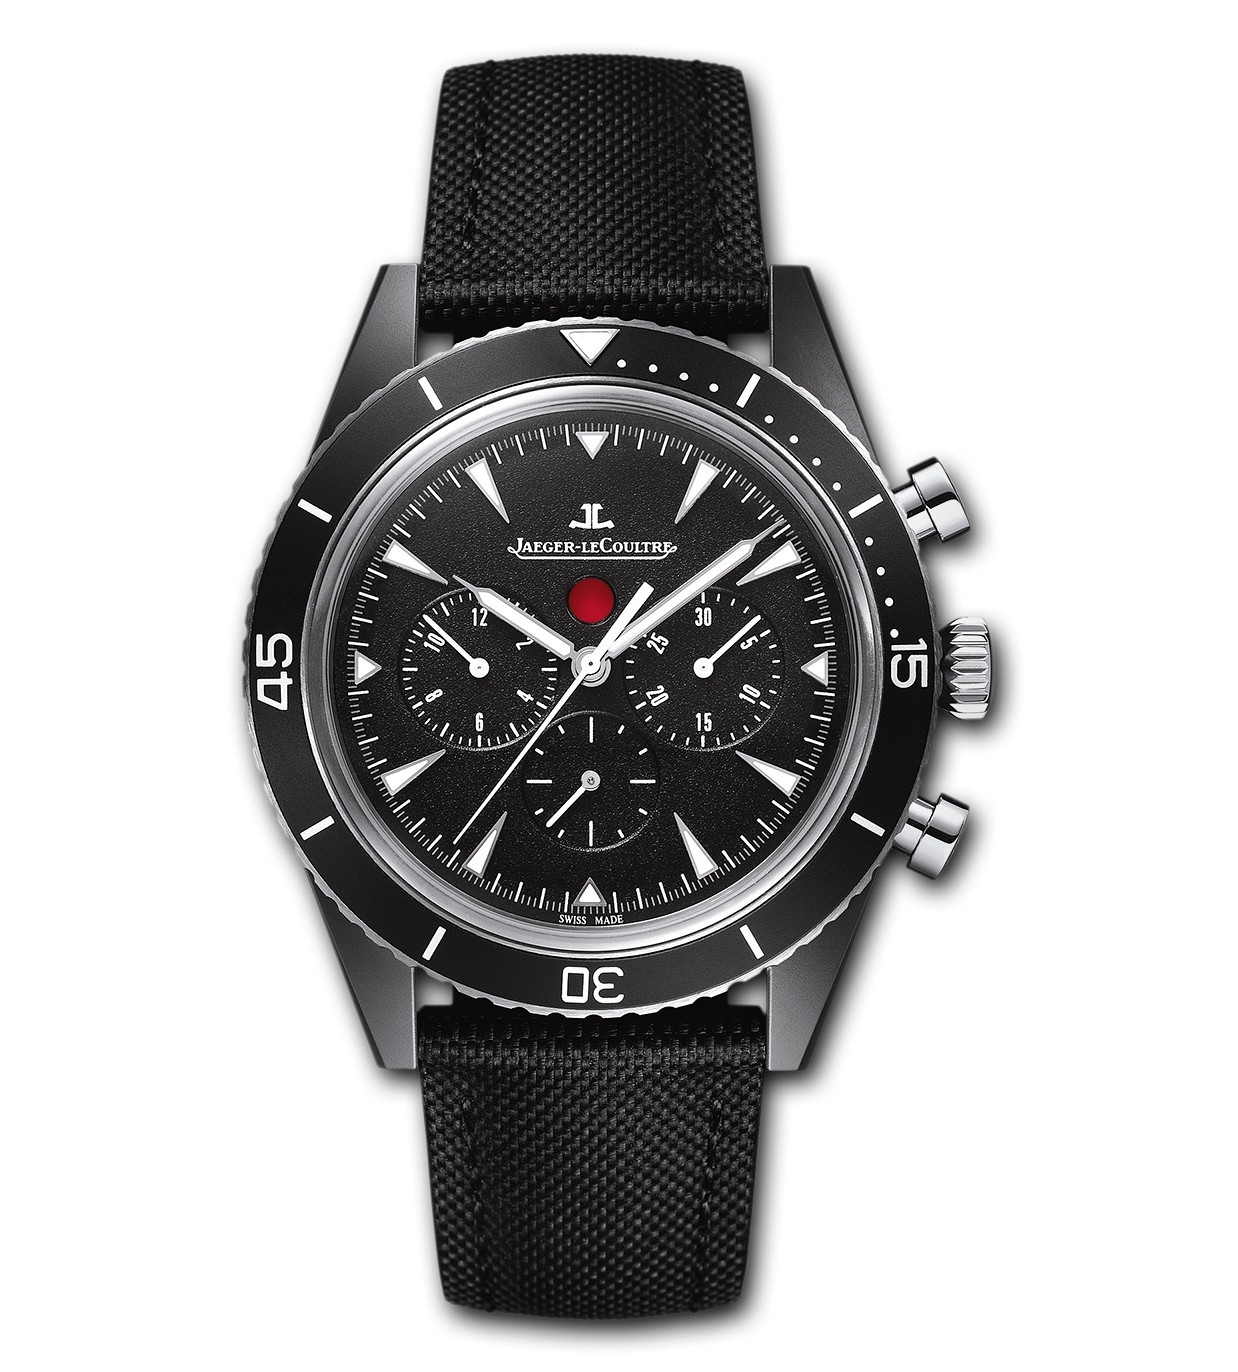 Jaeger-LeCoultre Master Extreme 208A570